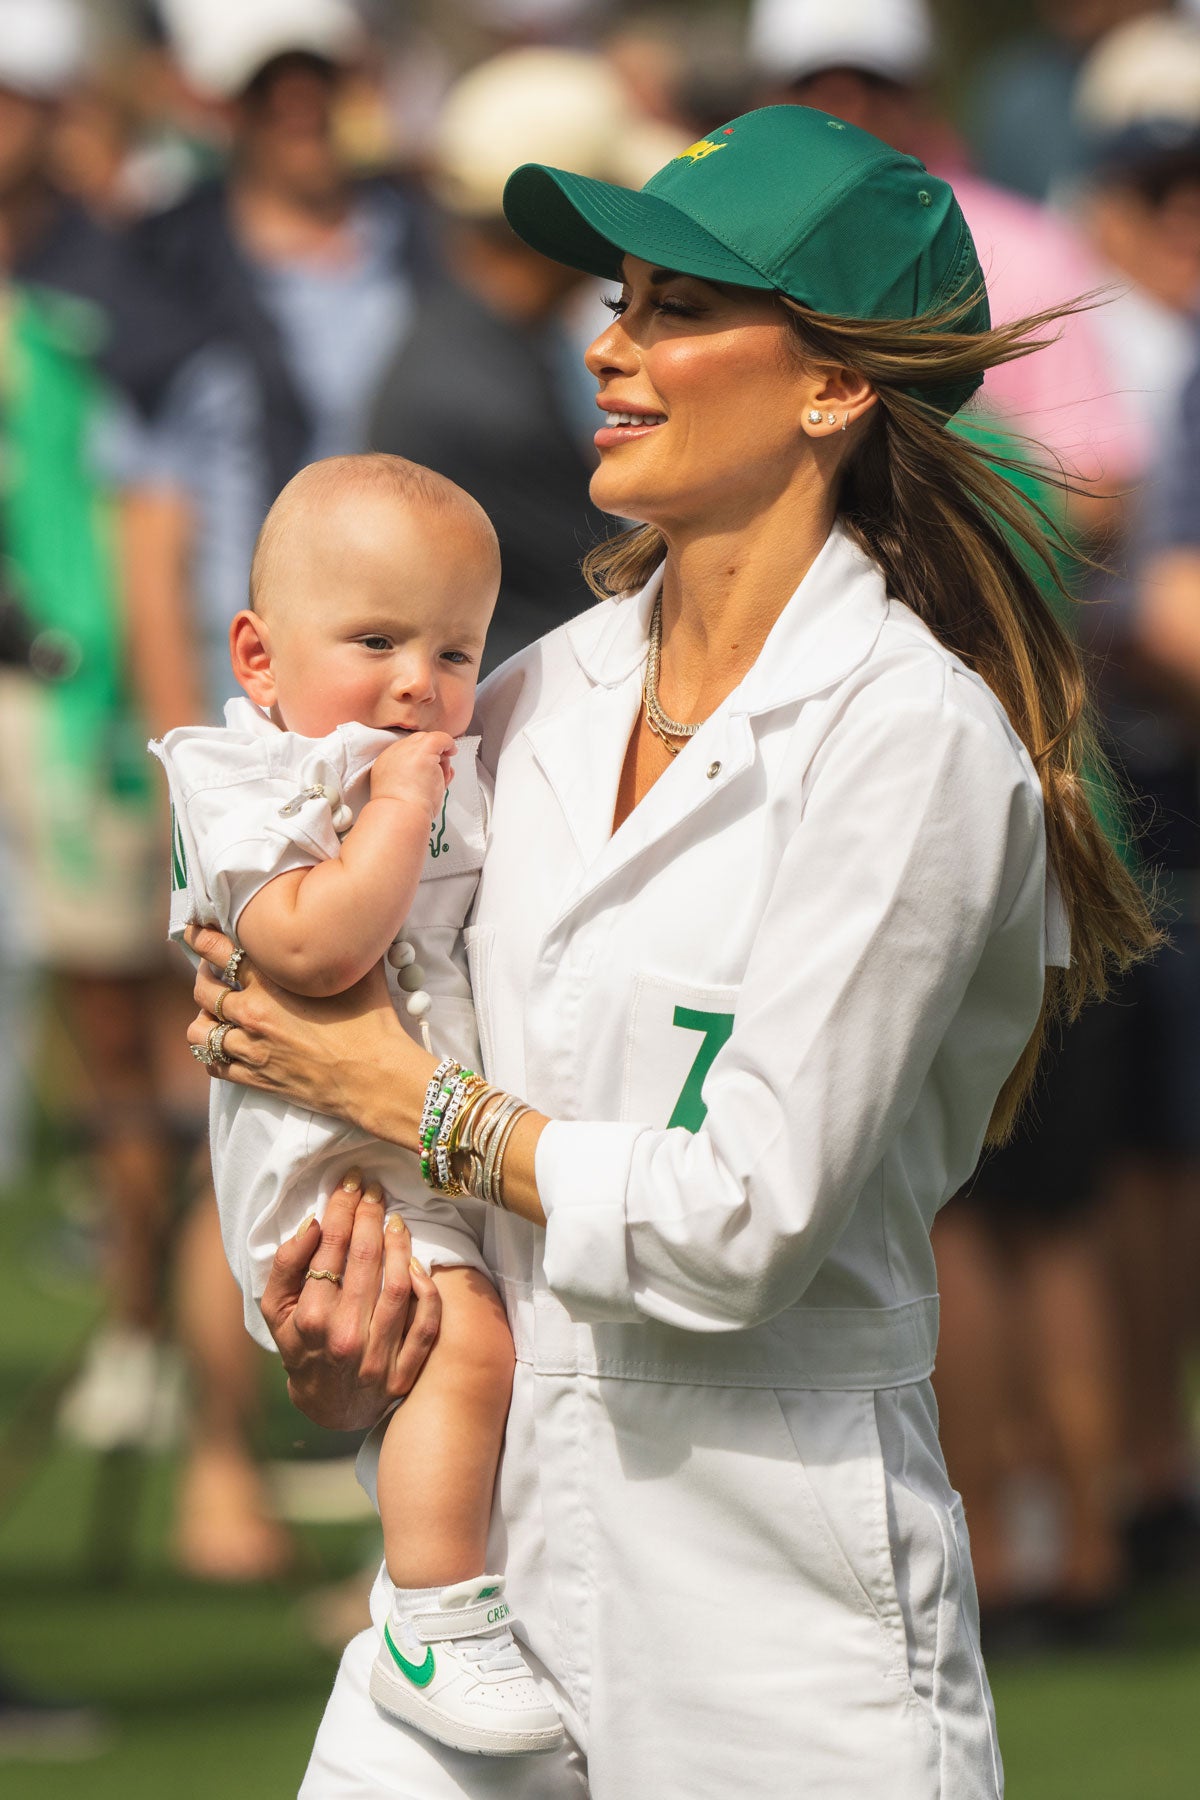 Jena Sims and her son, Crew